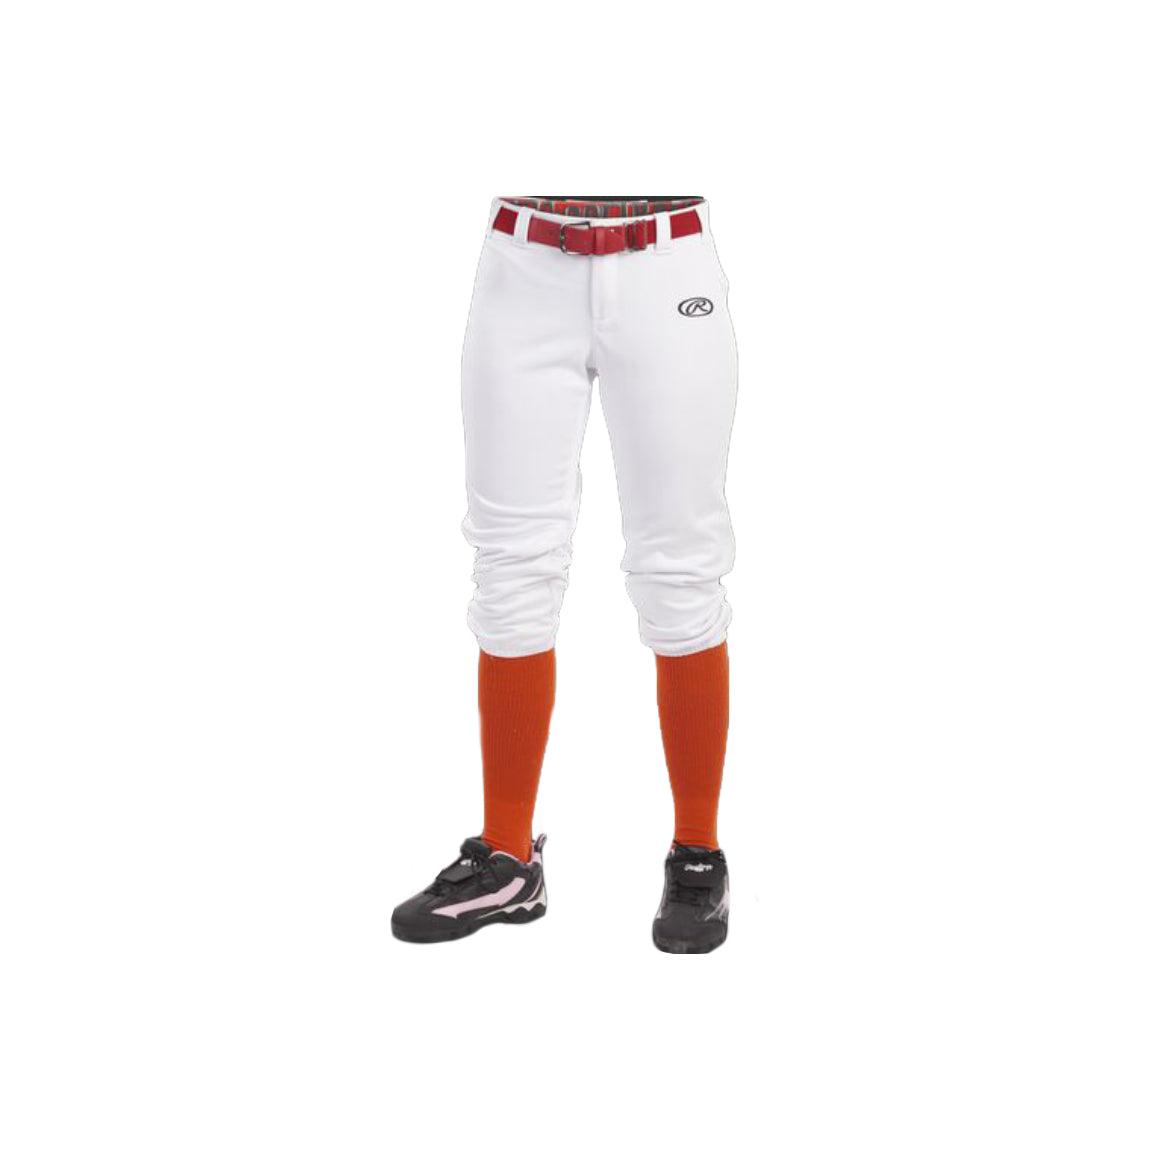 Women's Low-Rise Softball Pant - Senior - Sports Excellence